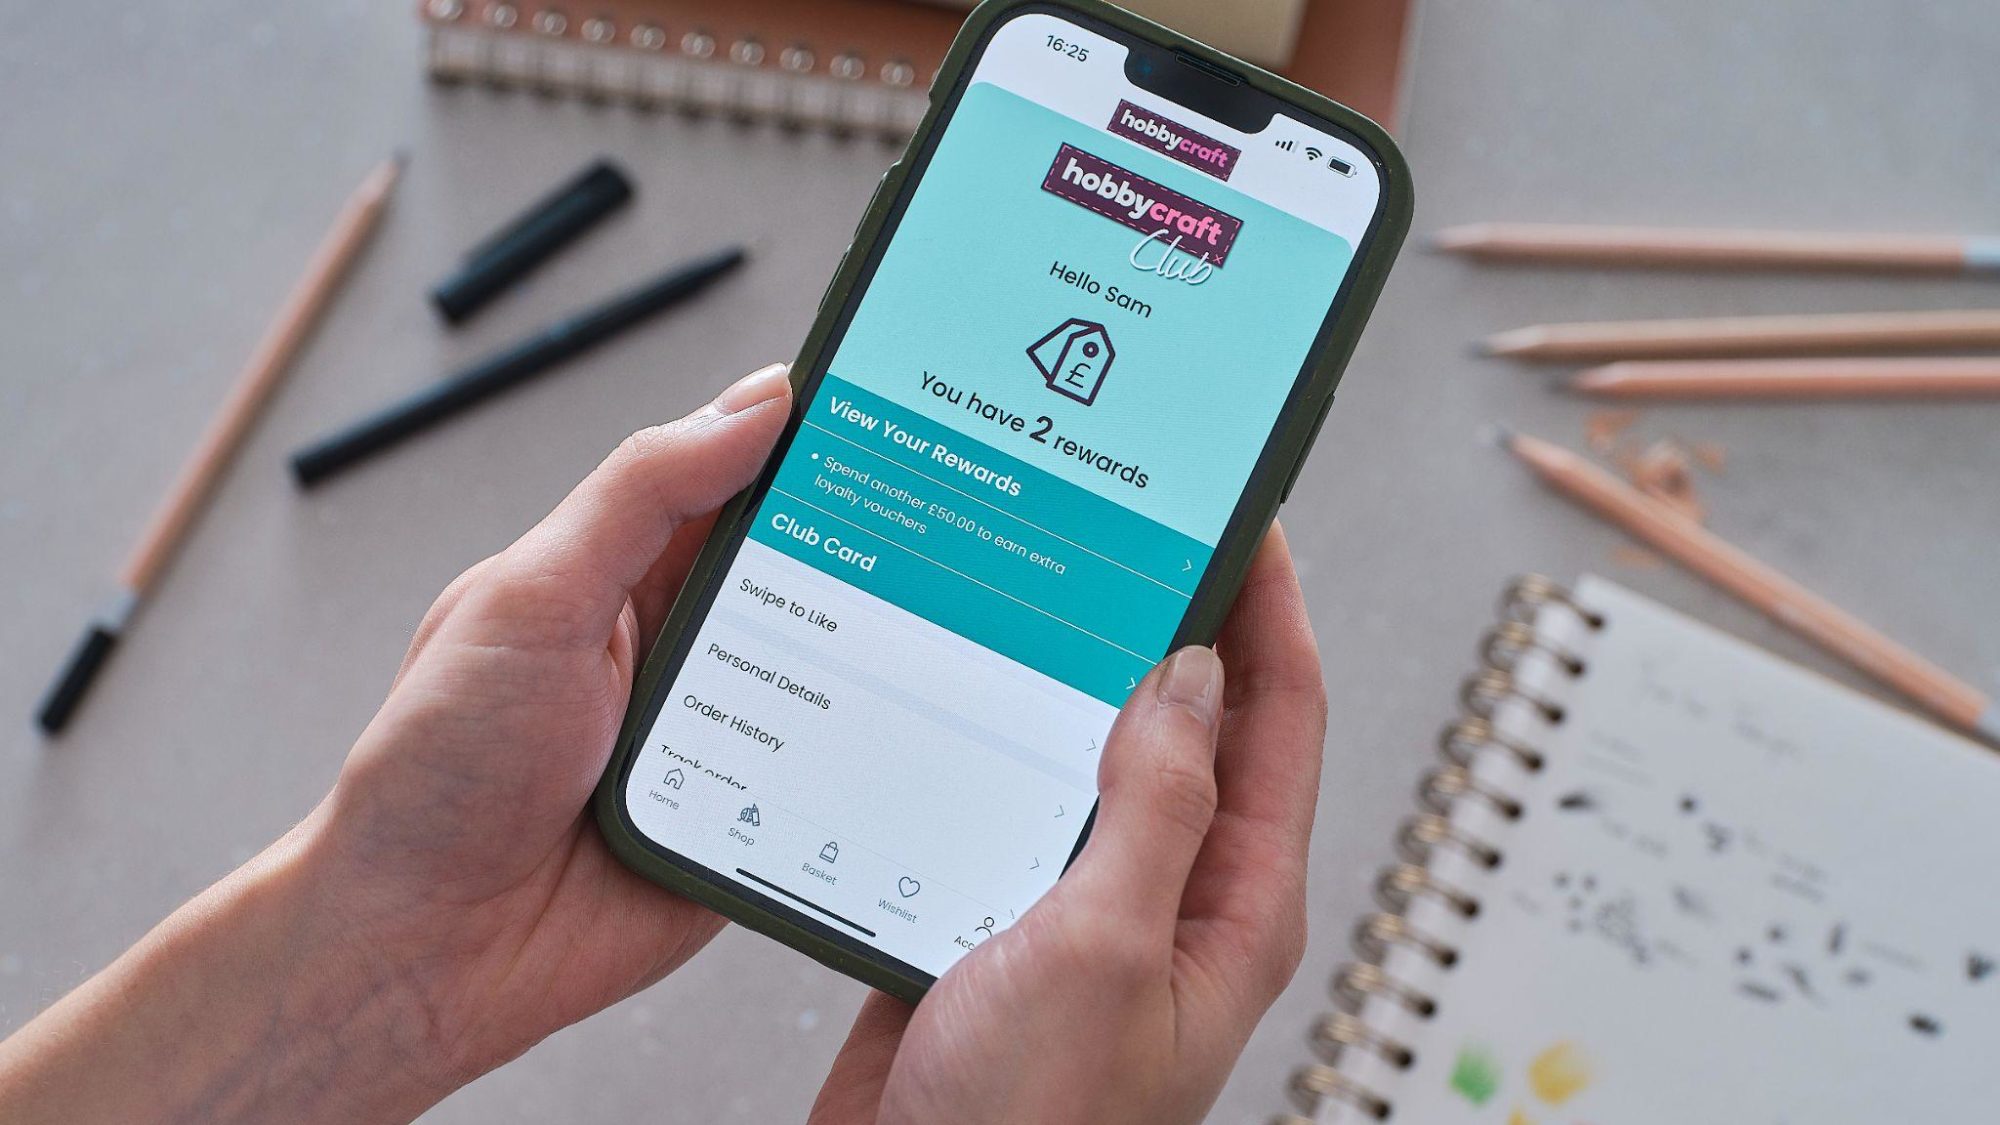 Hobbycraft enhances shopping experience with launch of new App